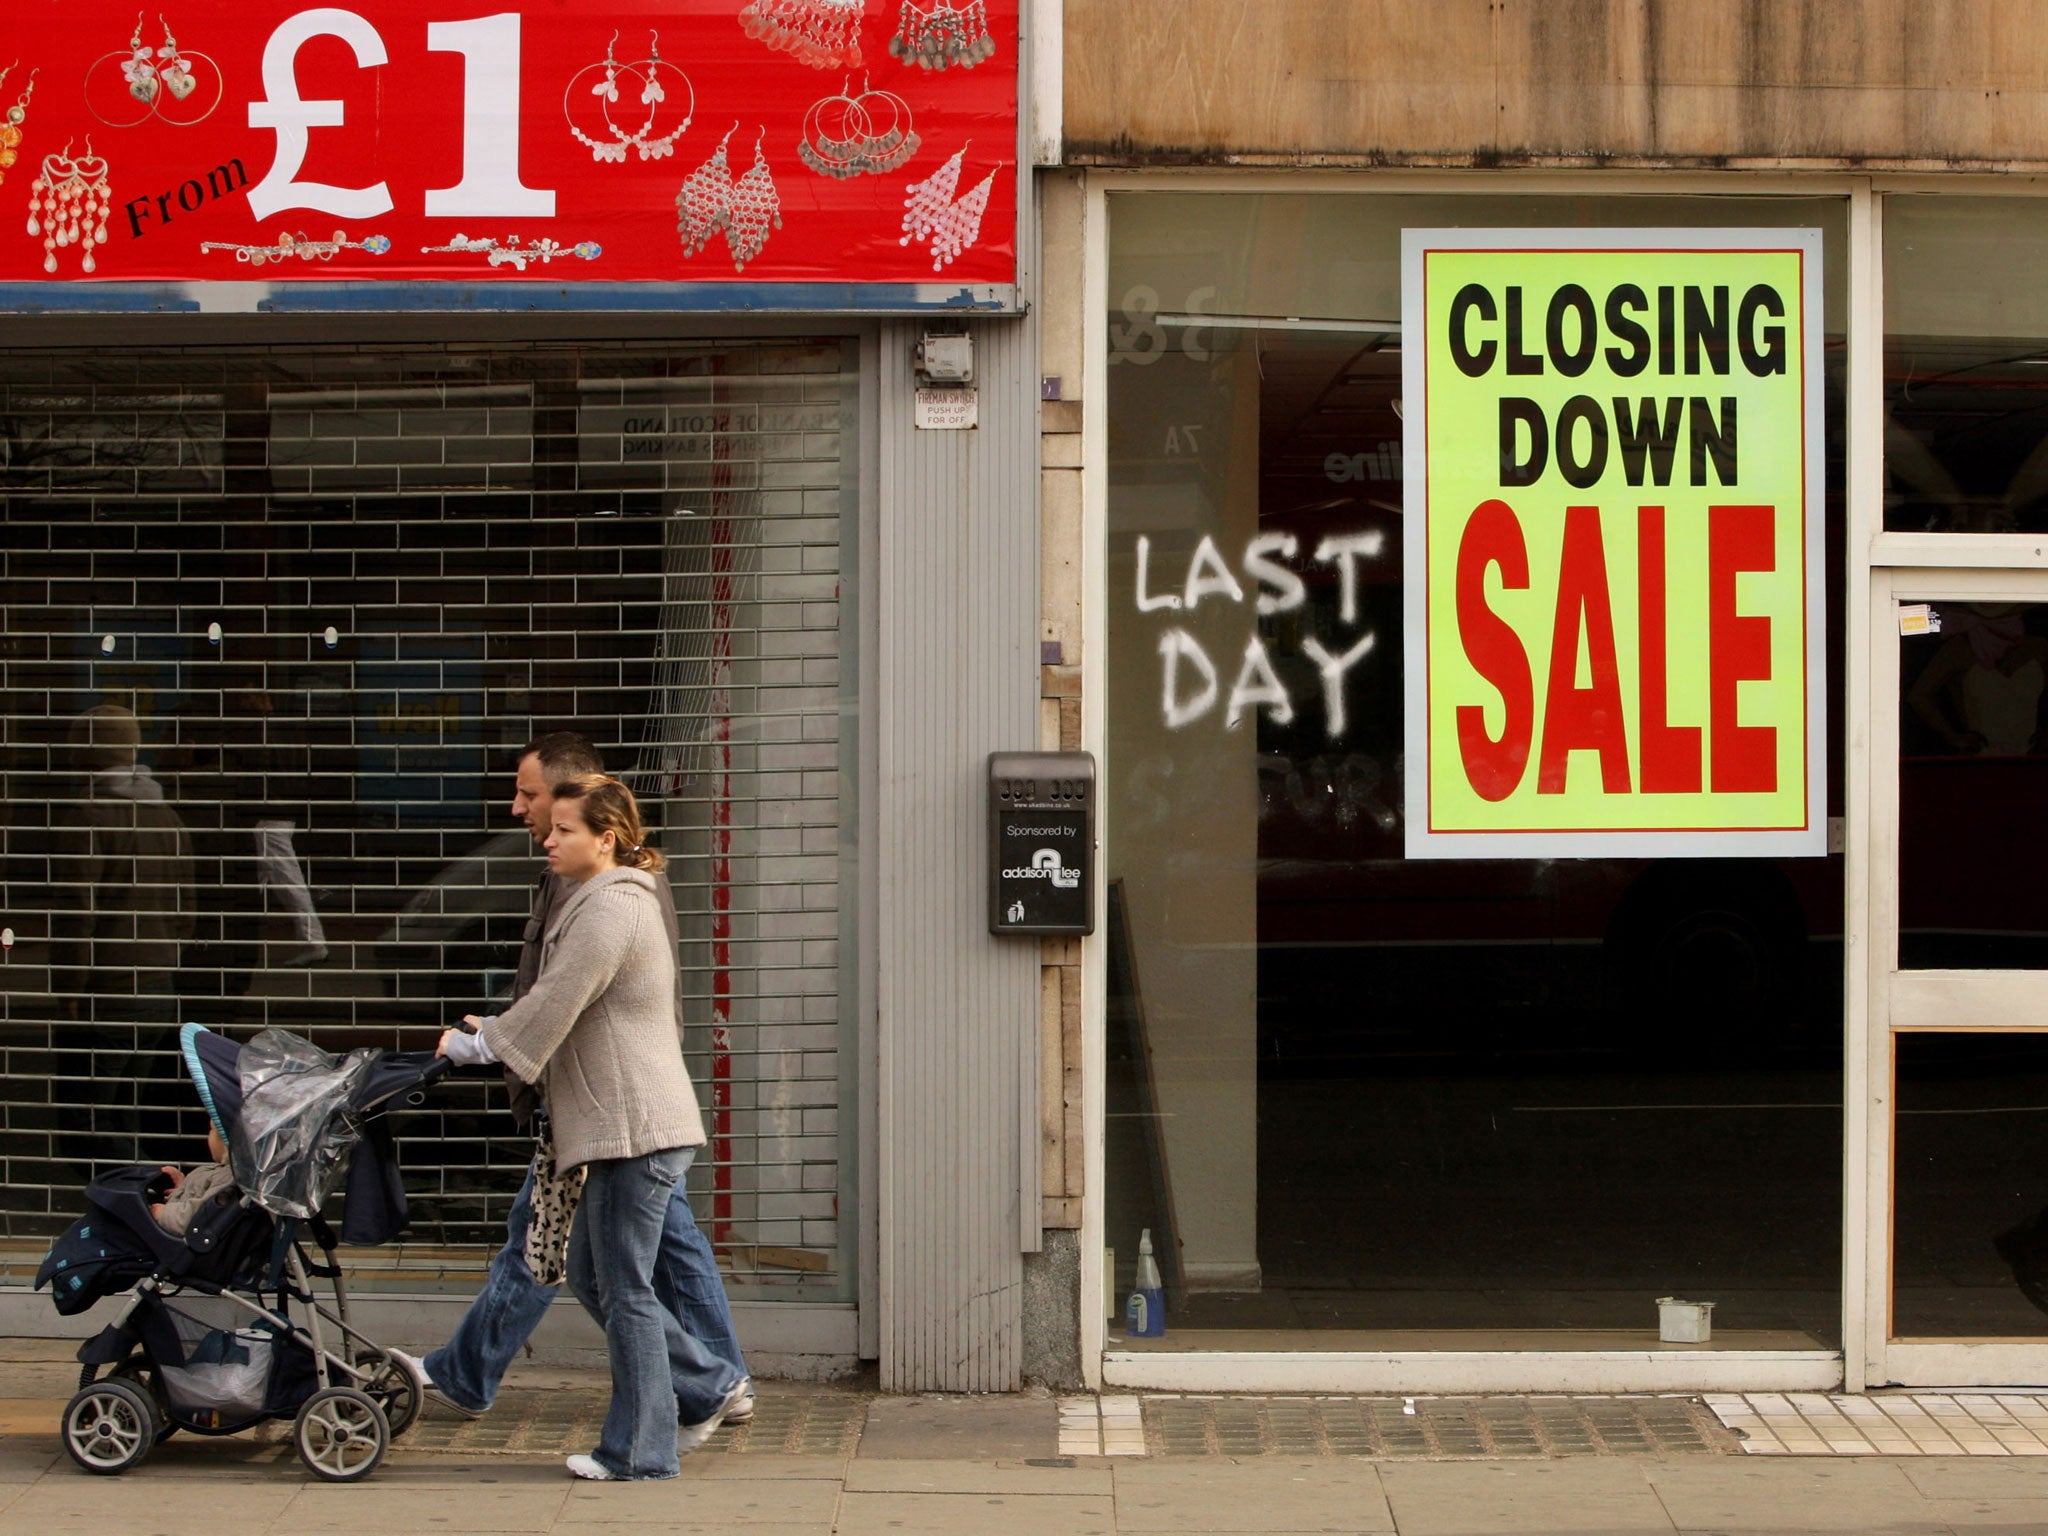 Members of the public walk past shops on Kilburn High Road on March 13, 2009 in London, England.